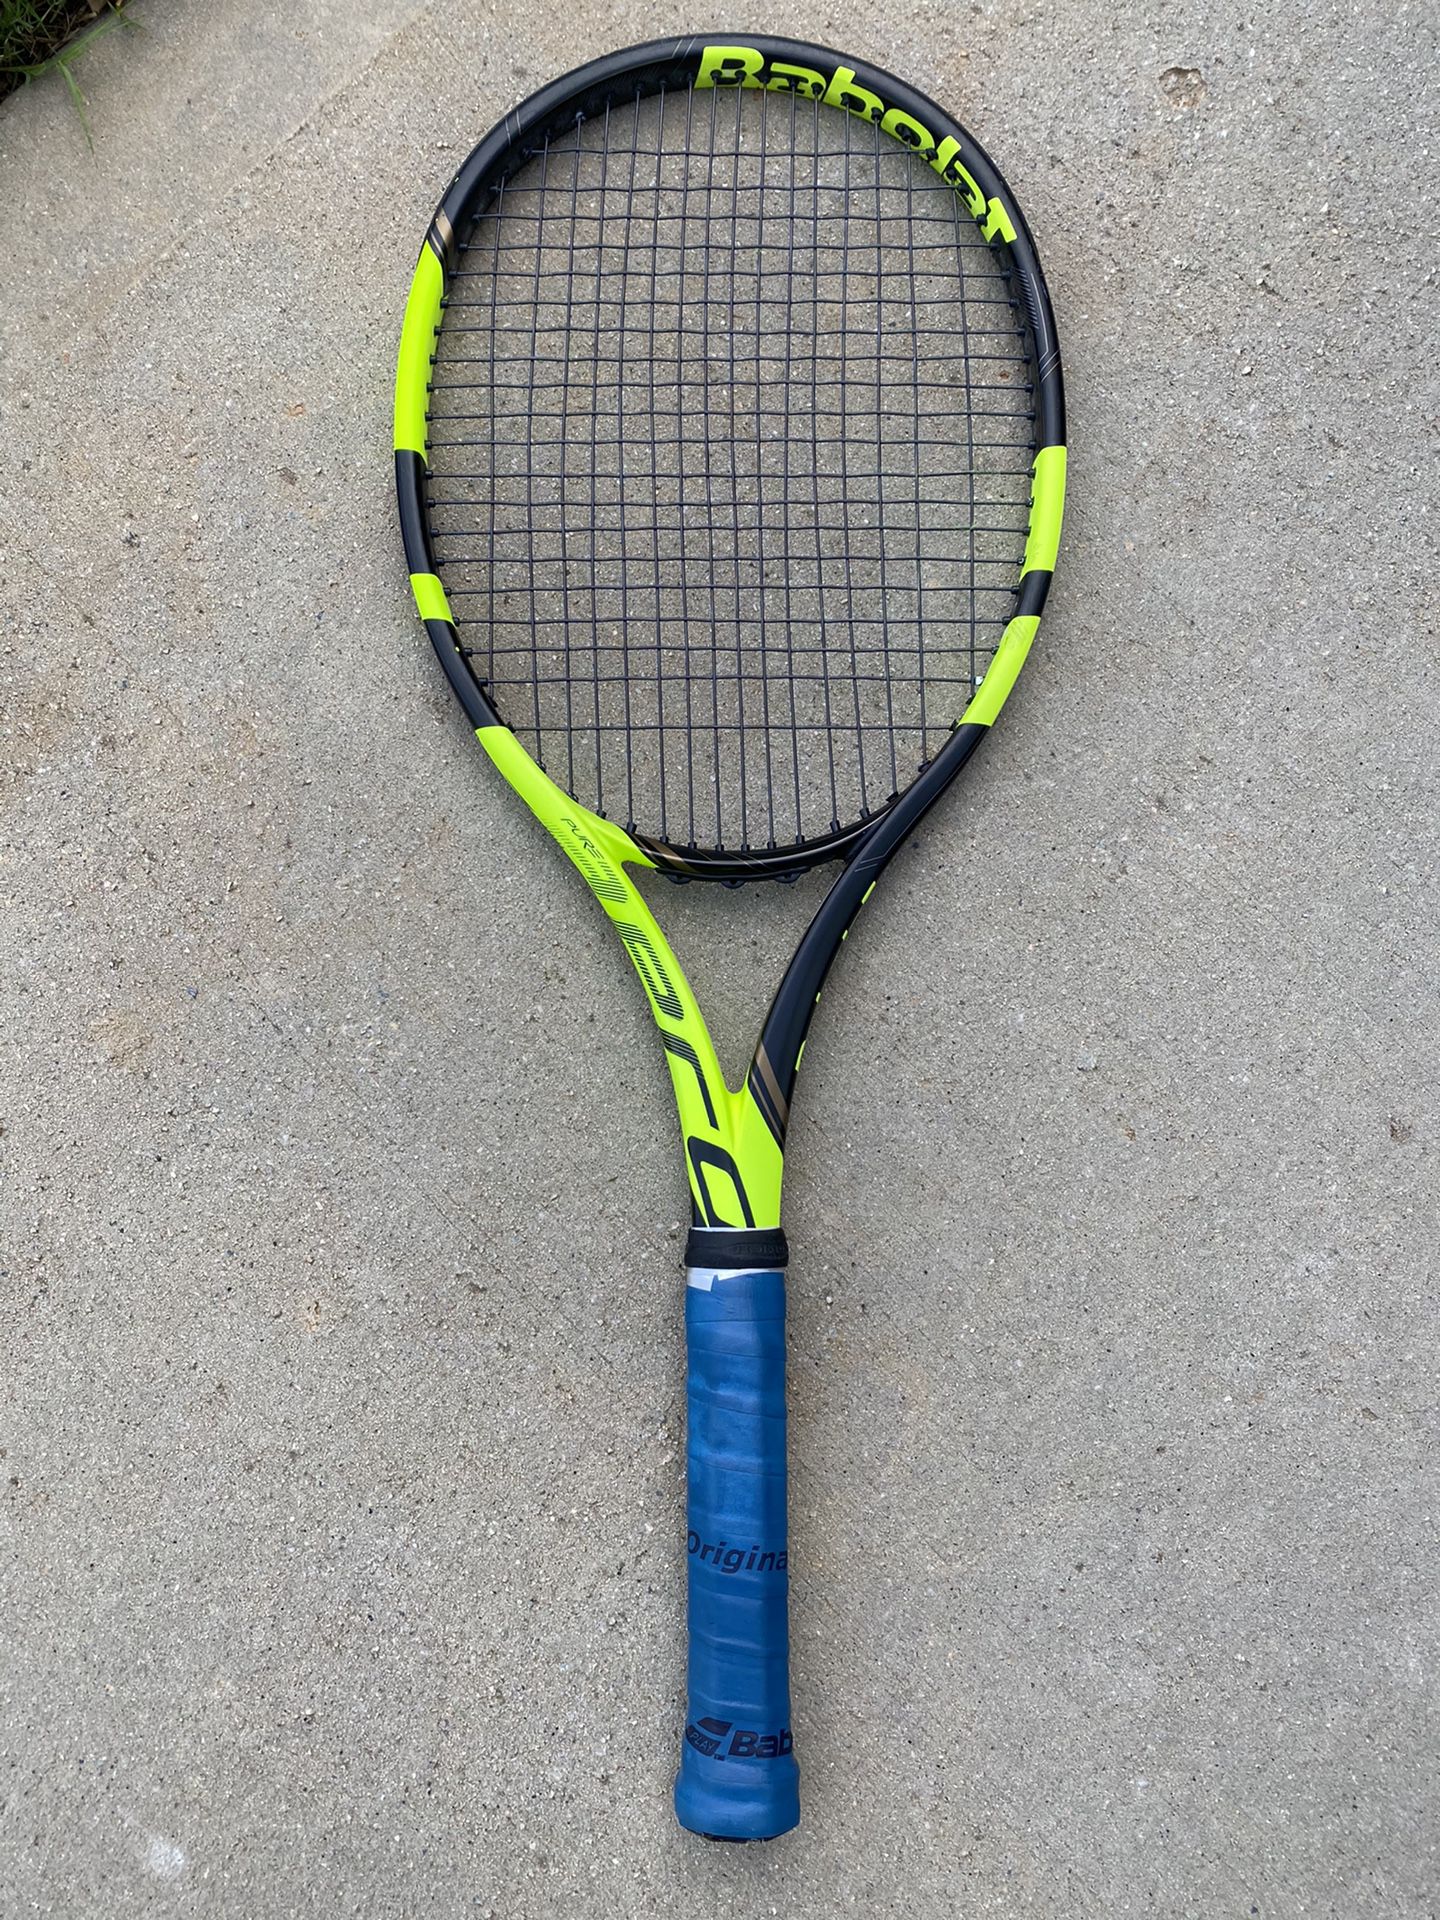 Babolat Aero Pure 4 3/8 grip size, weight 11.3 oz. RPM Blast strings @ 55 tension (new strings)